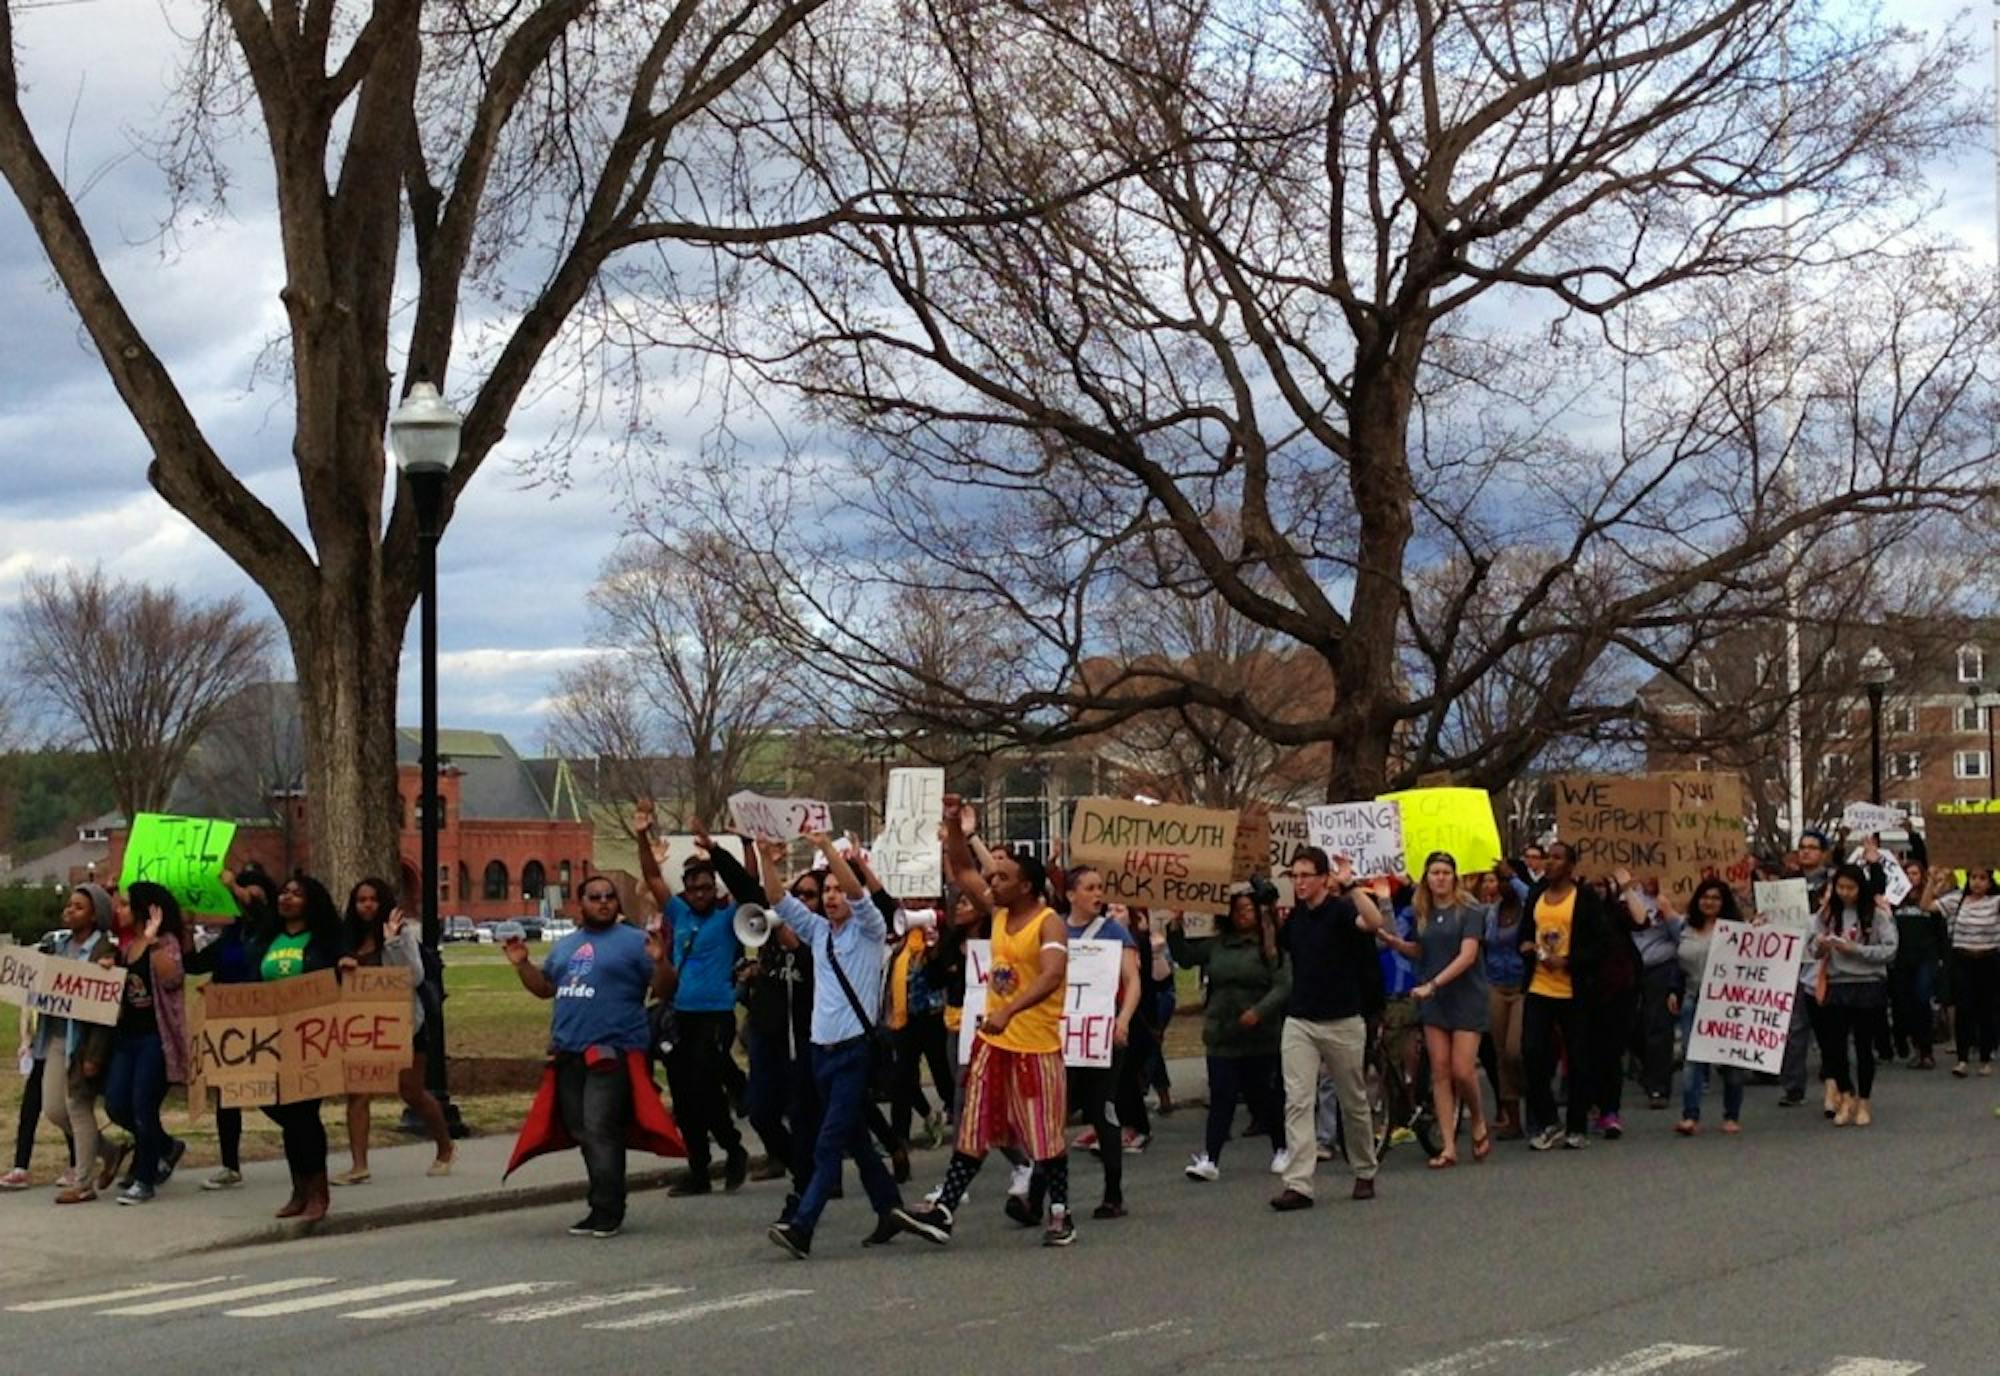 Roughly 150 students marched around campus in response to recent events in Baltimore.